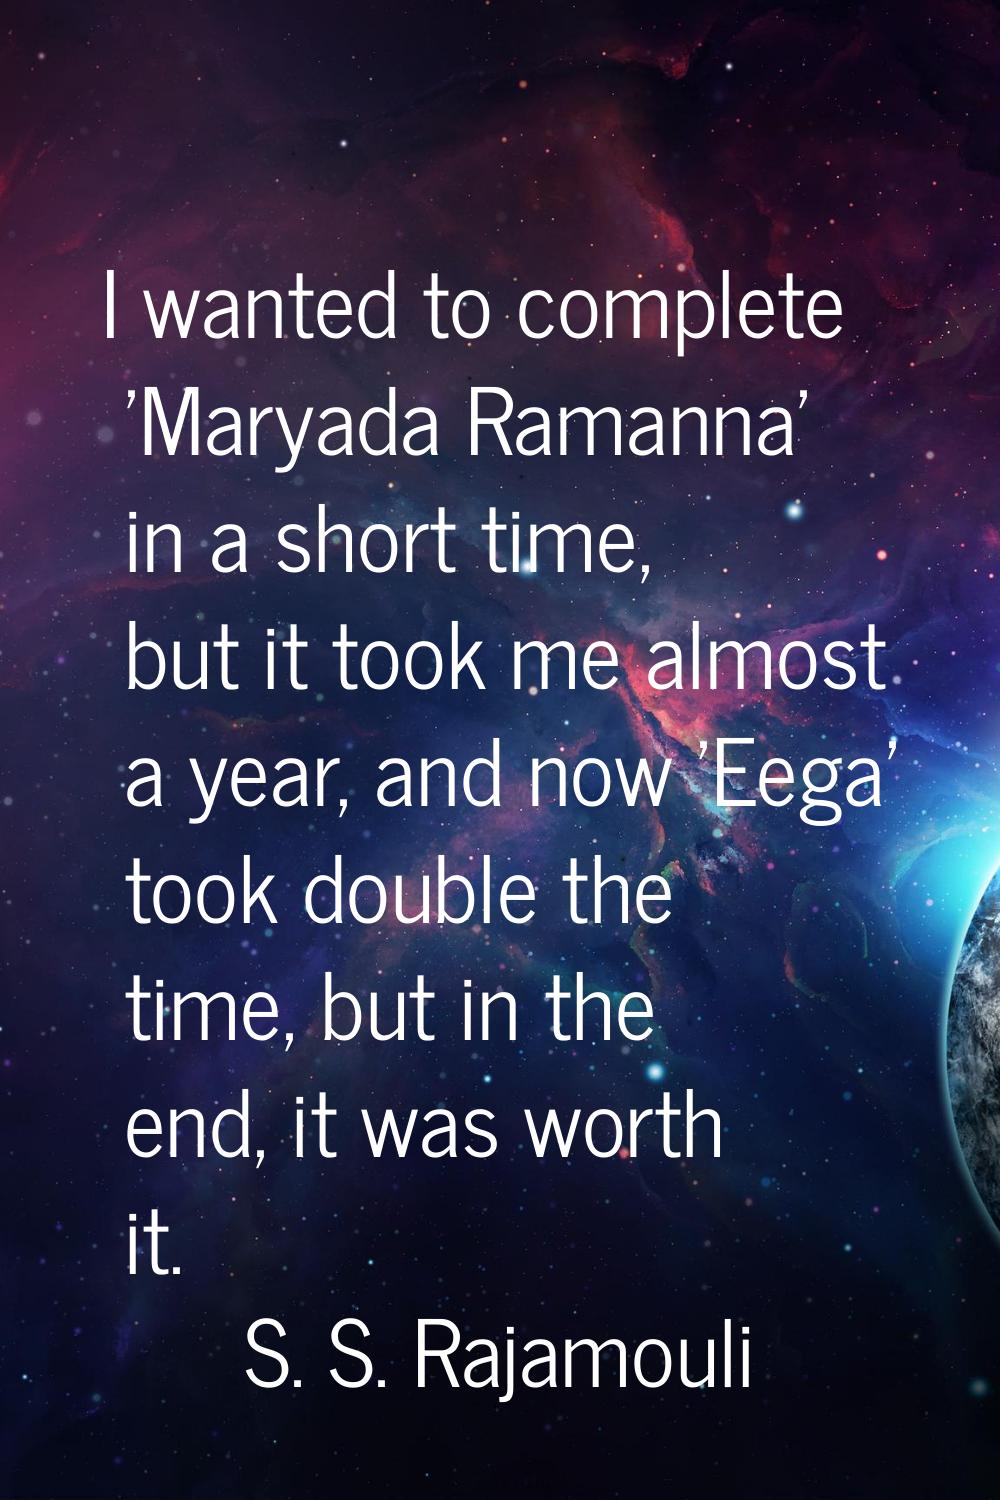 I wanted to complete 'Maryada Ramanna' in a short time, but it took me almost a year, and now 'Eega